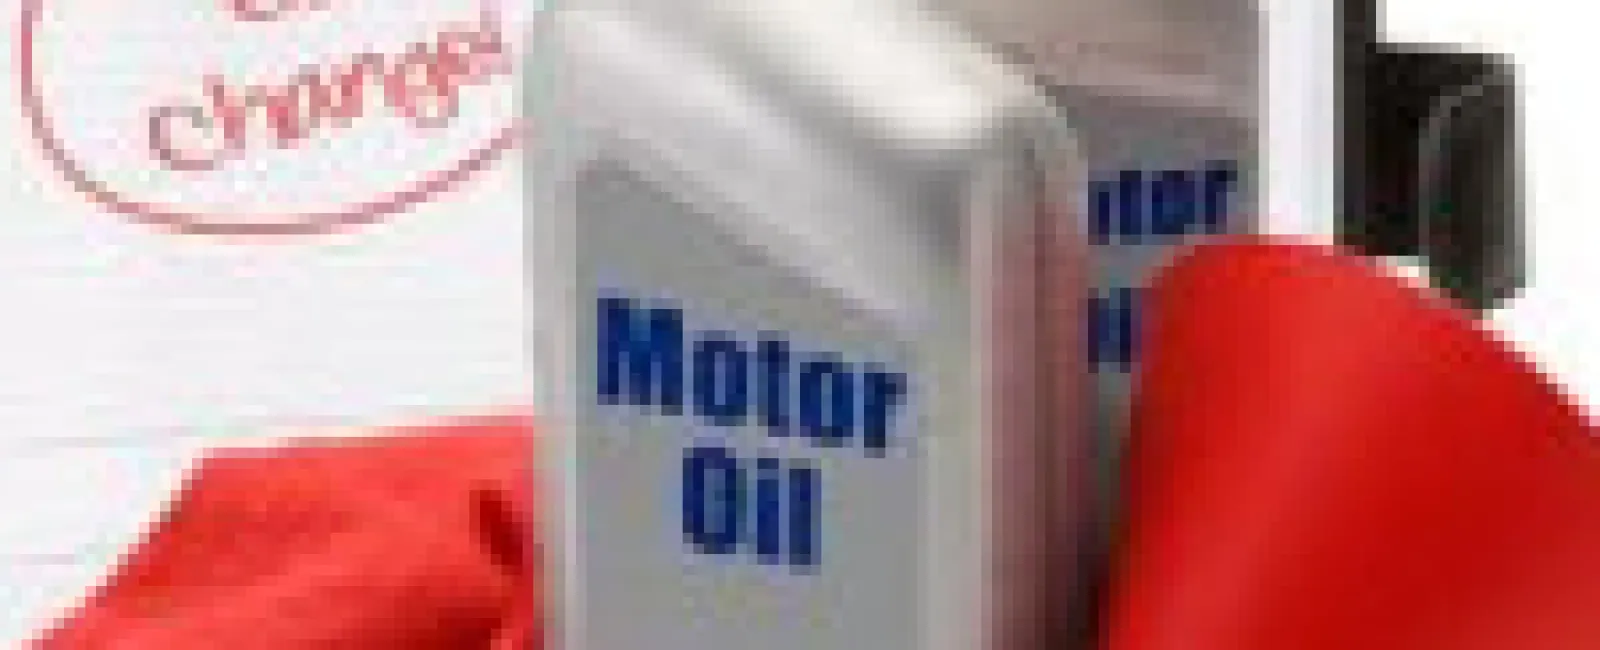 motor oil container